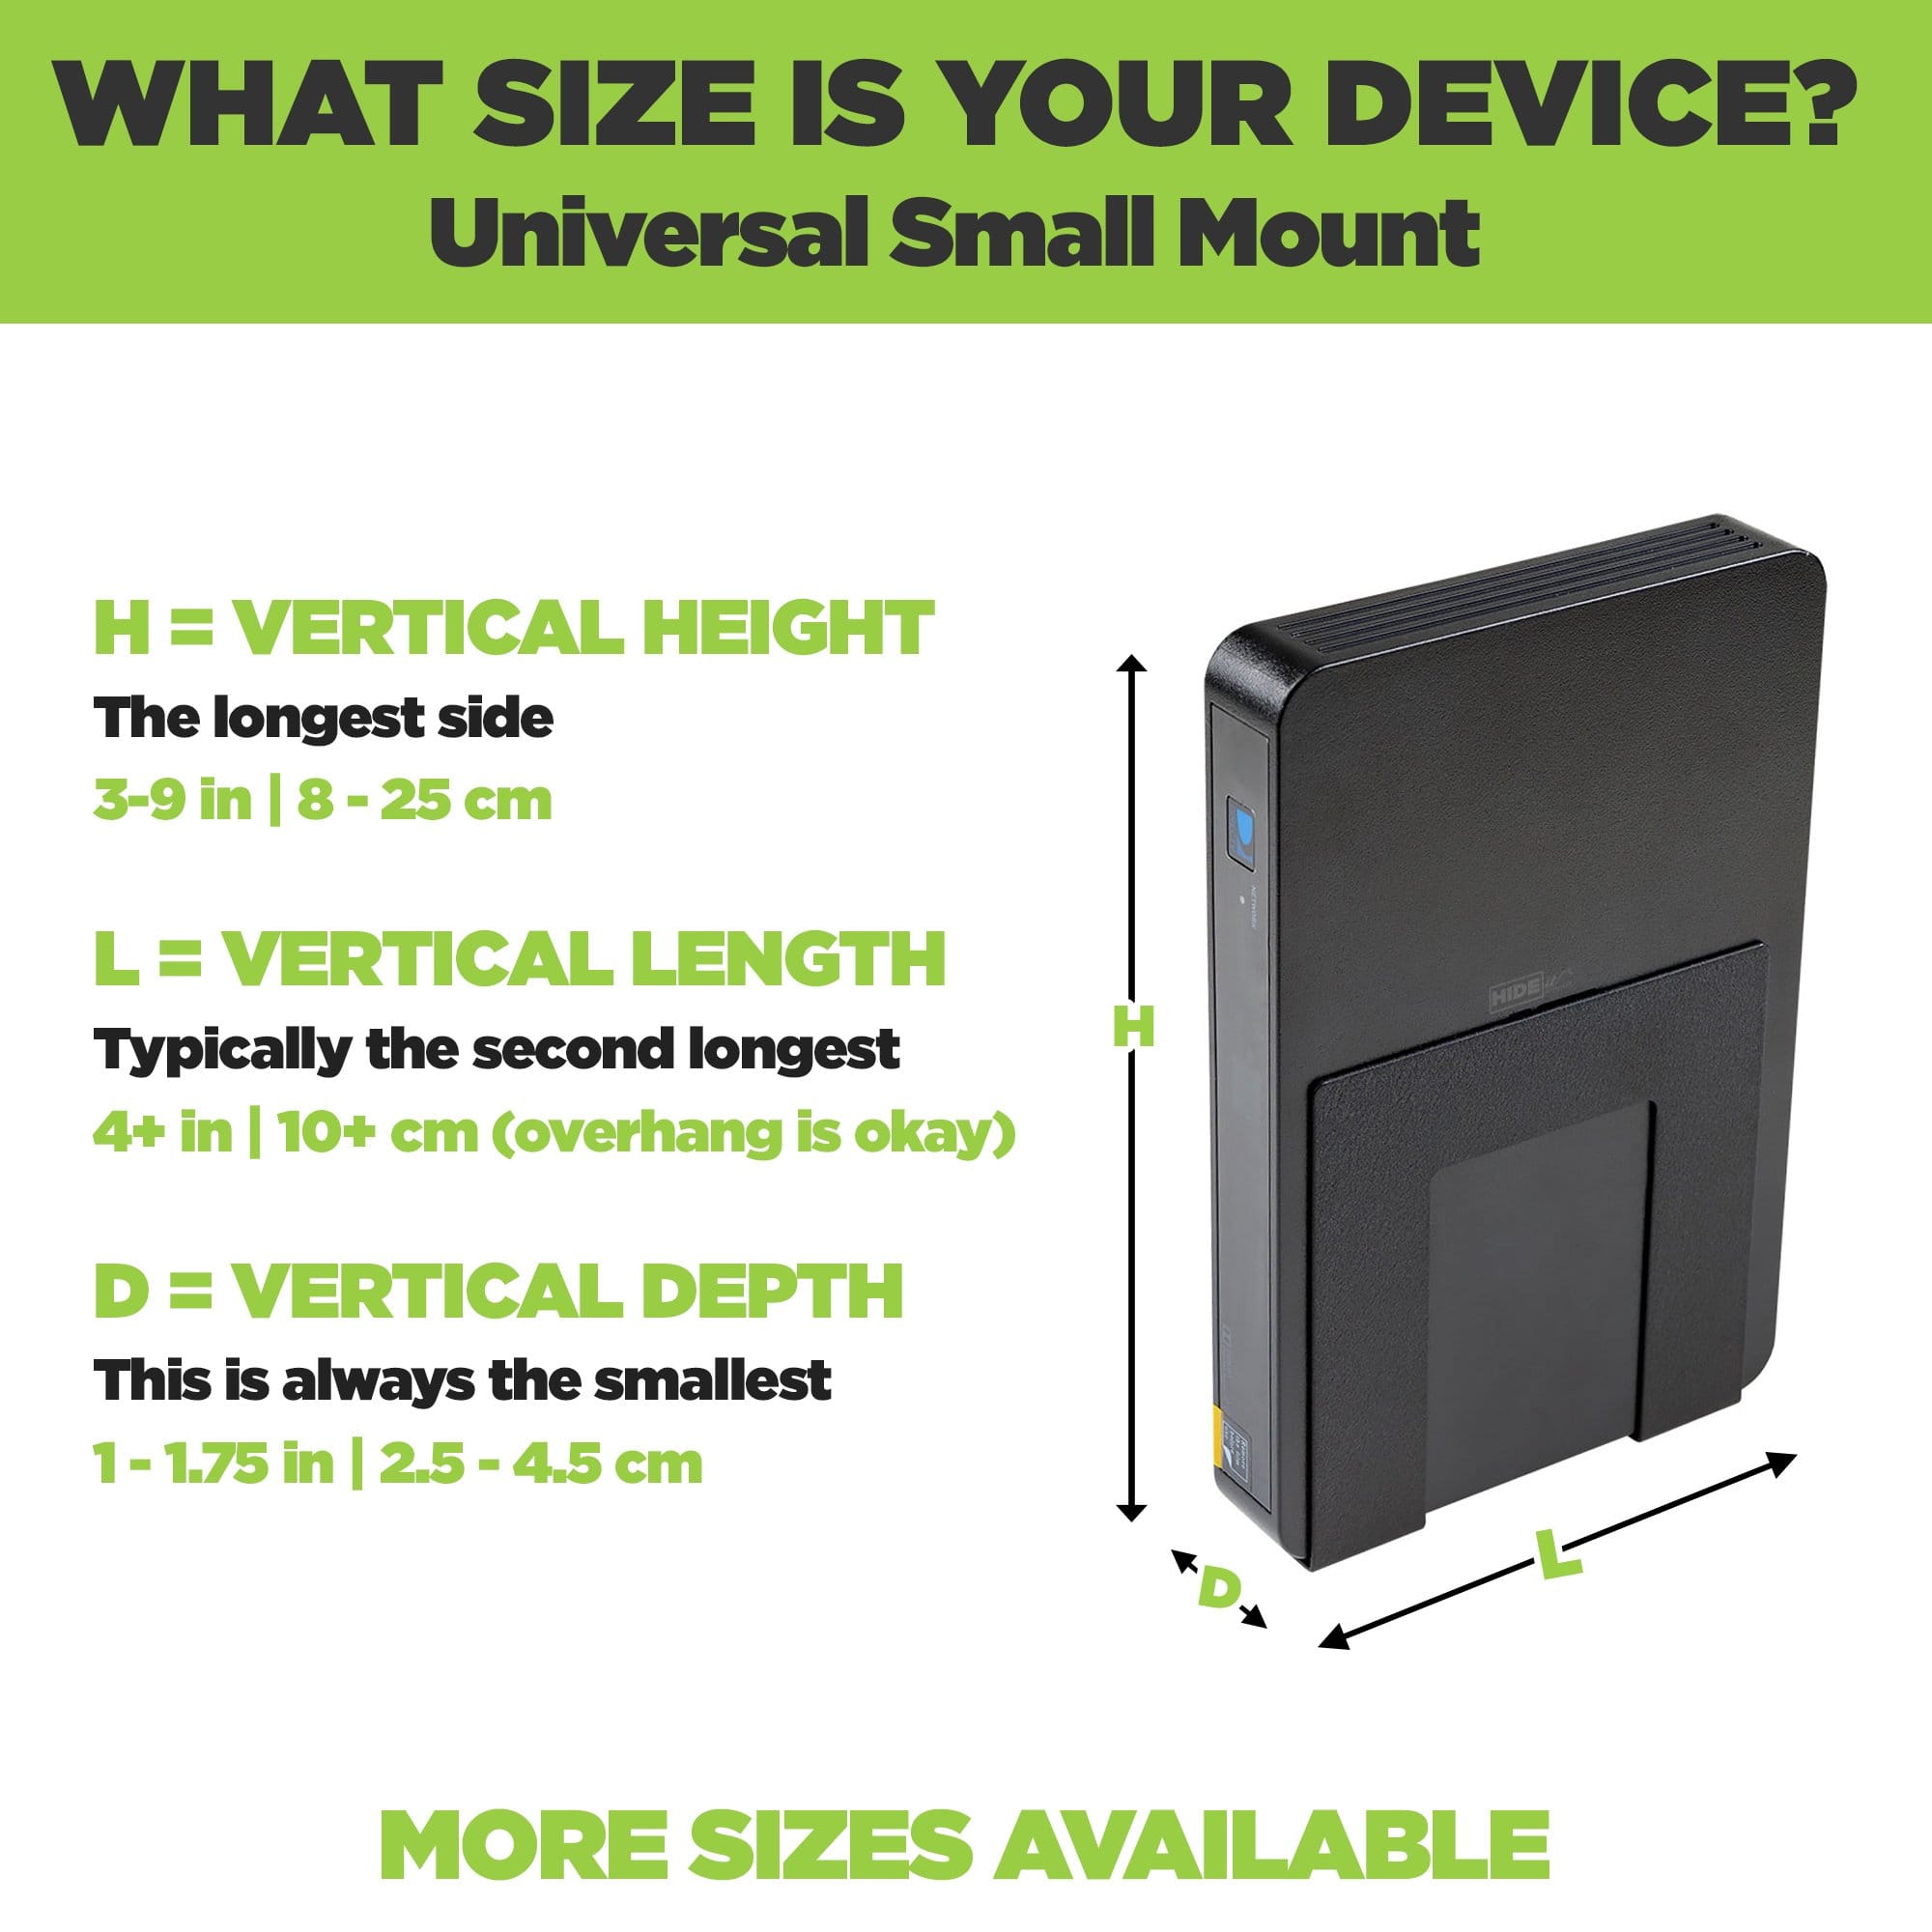 Universal Small Mount adjusts to fit a wide range of devices including wireless routers and modems.